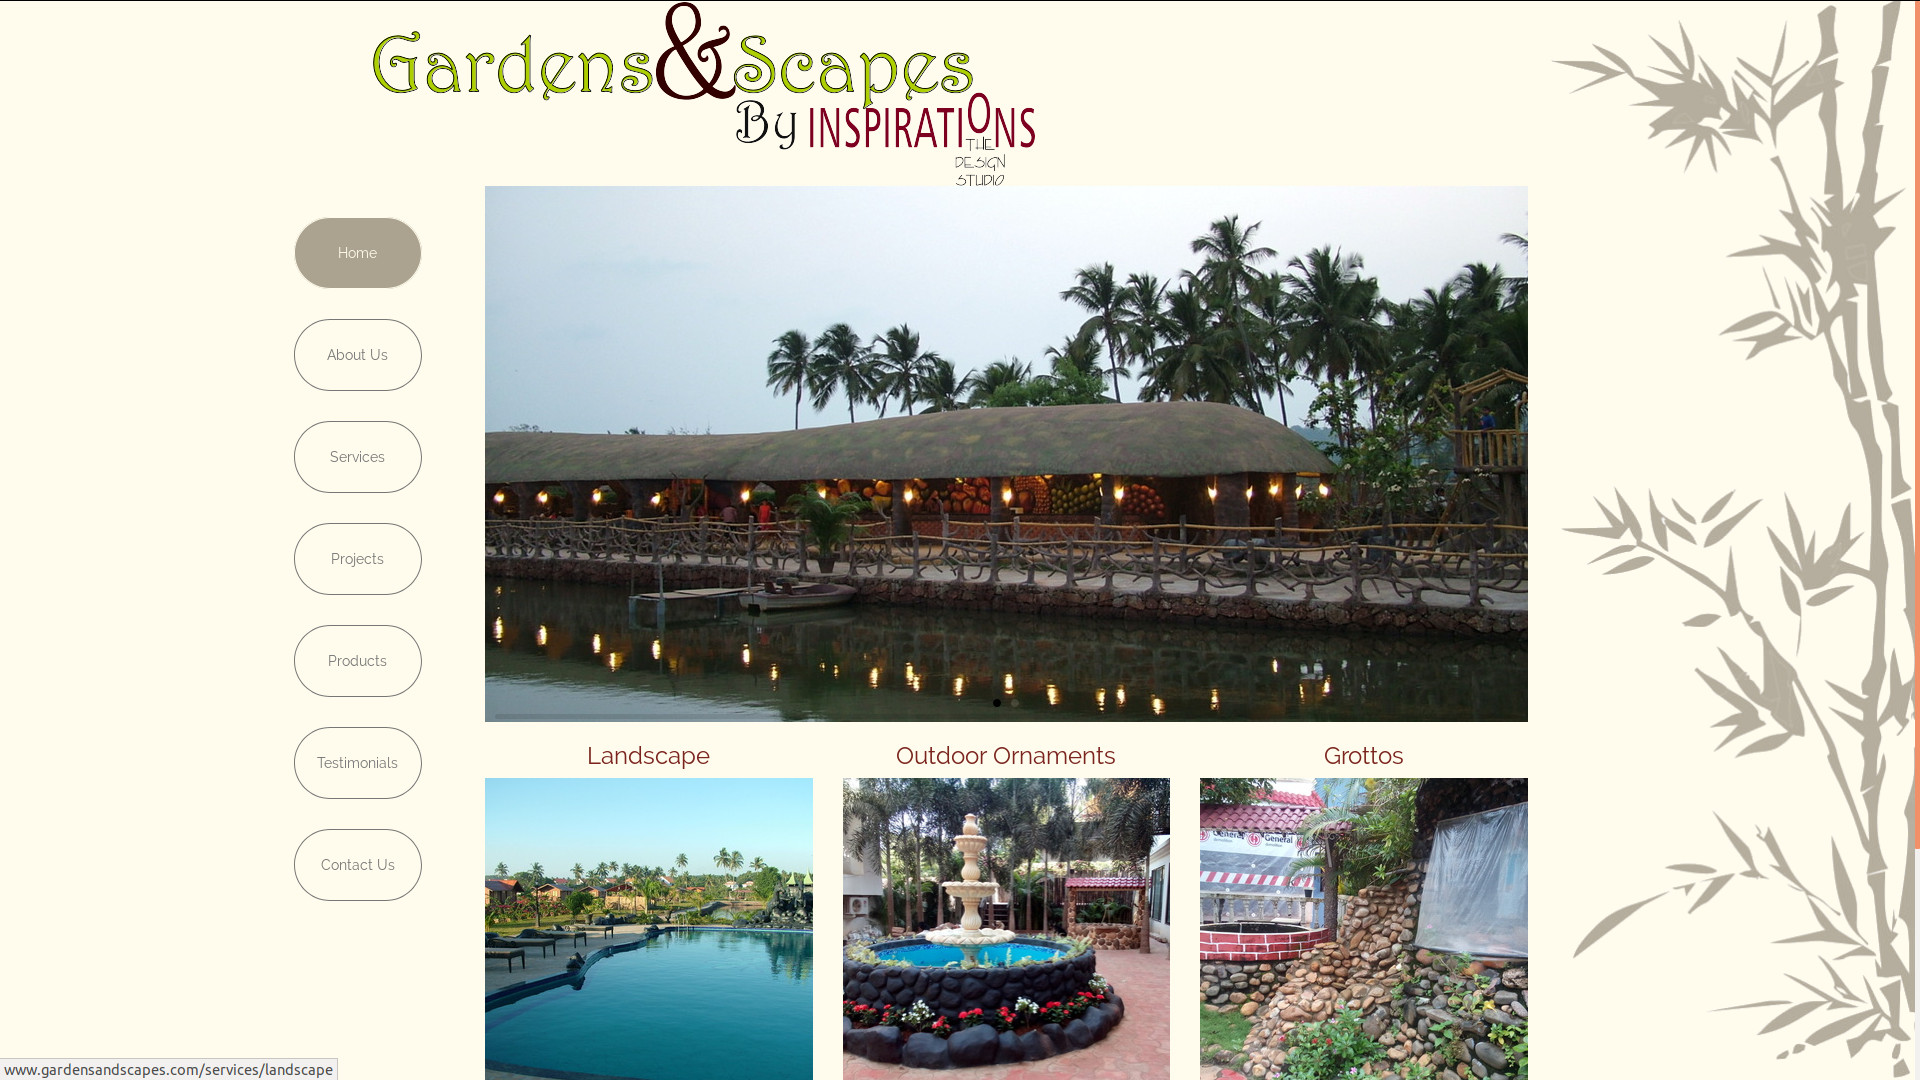 Gardens & Scapes